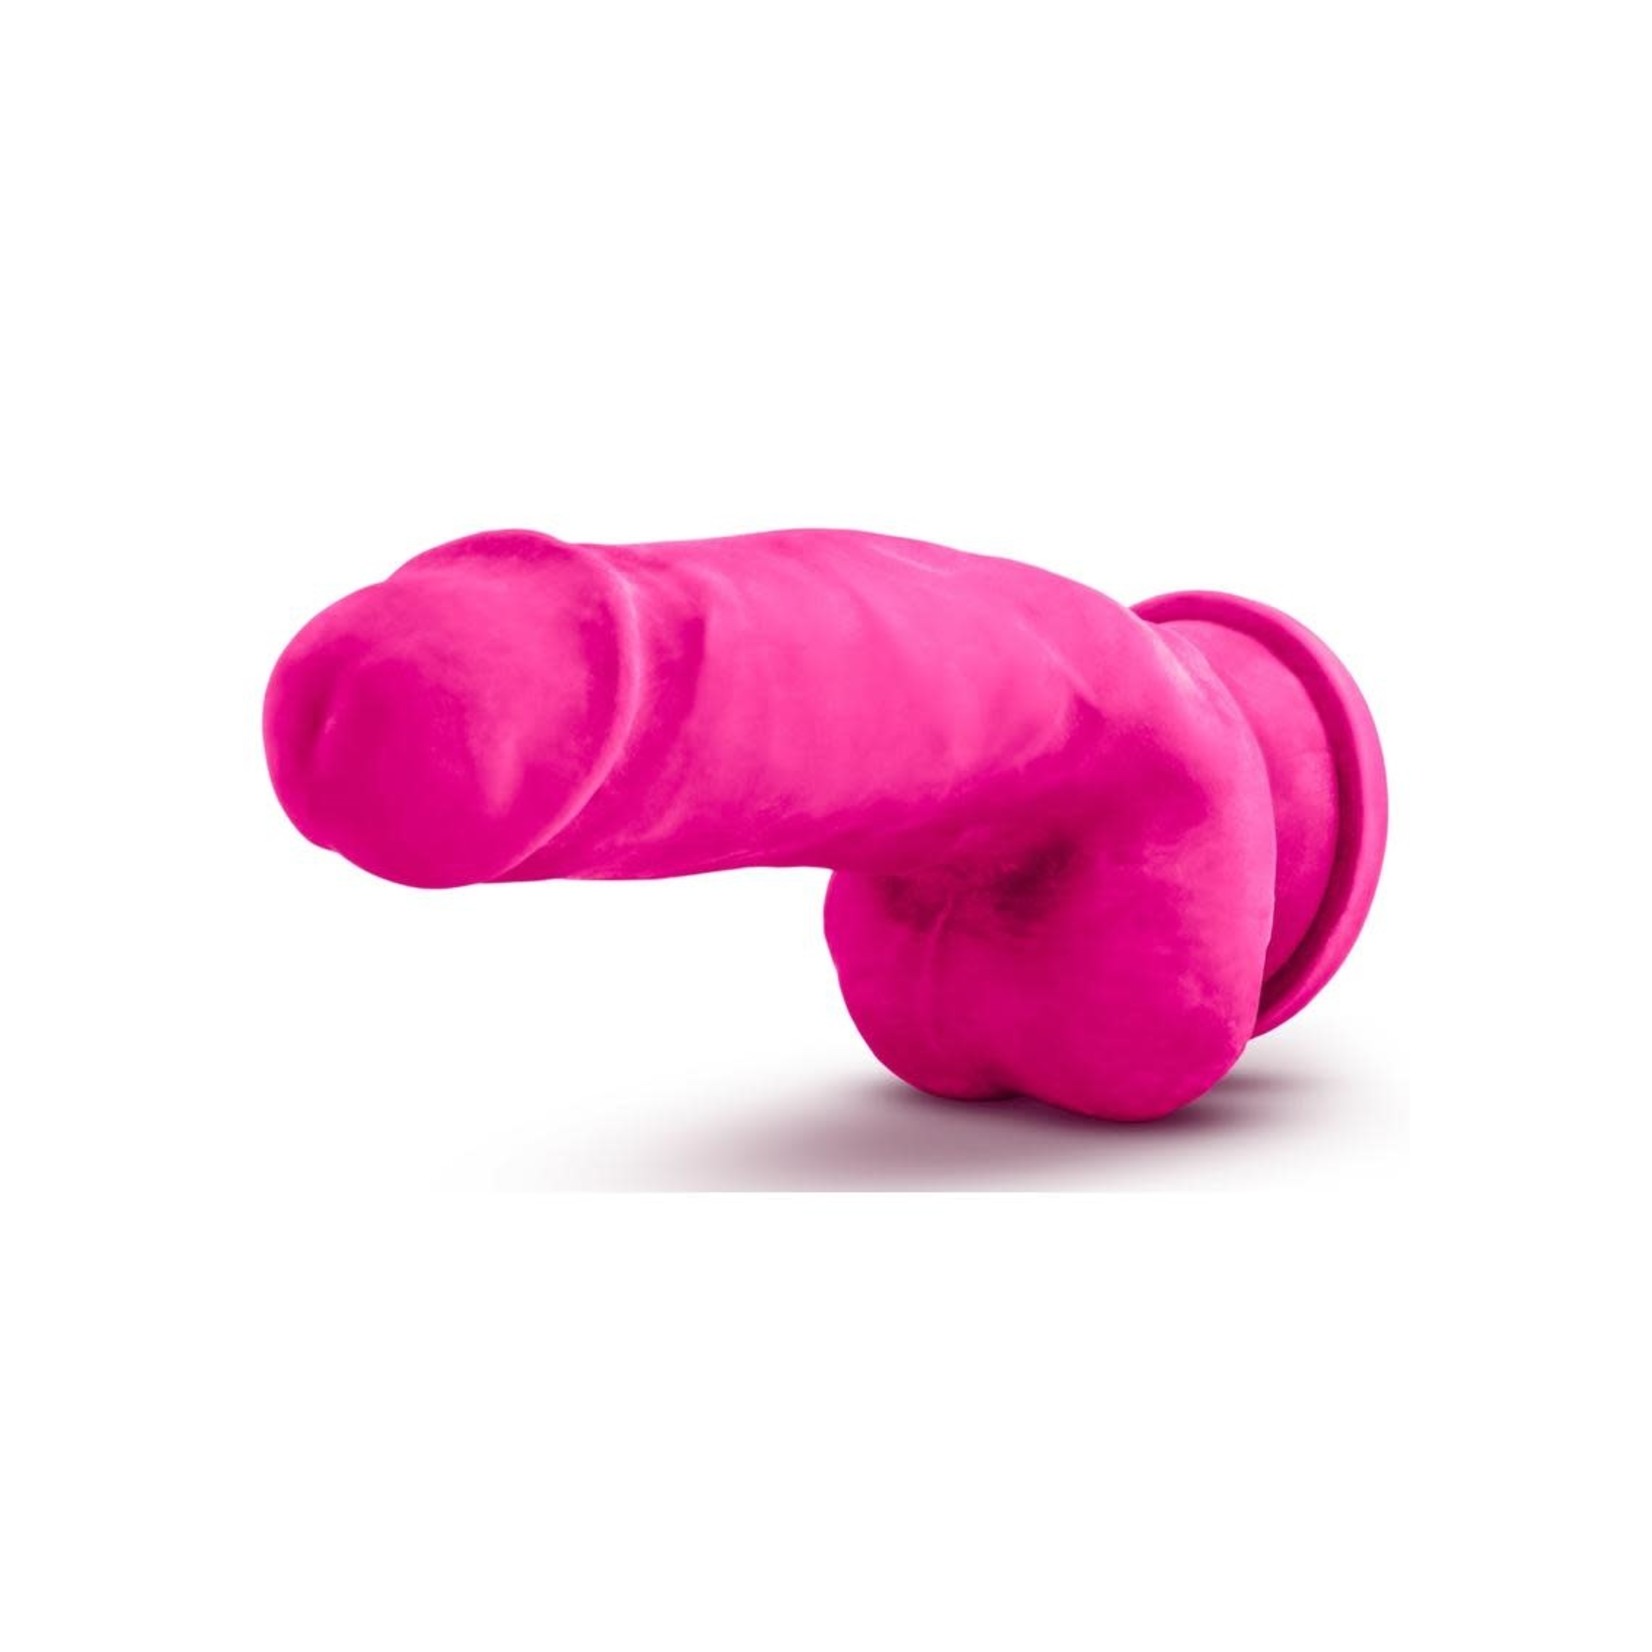 Au Naturel Bold Beefy Dildo With Suction Cup 7in - Pink